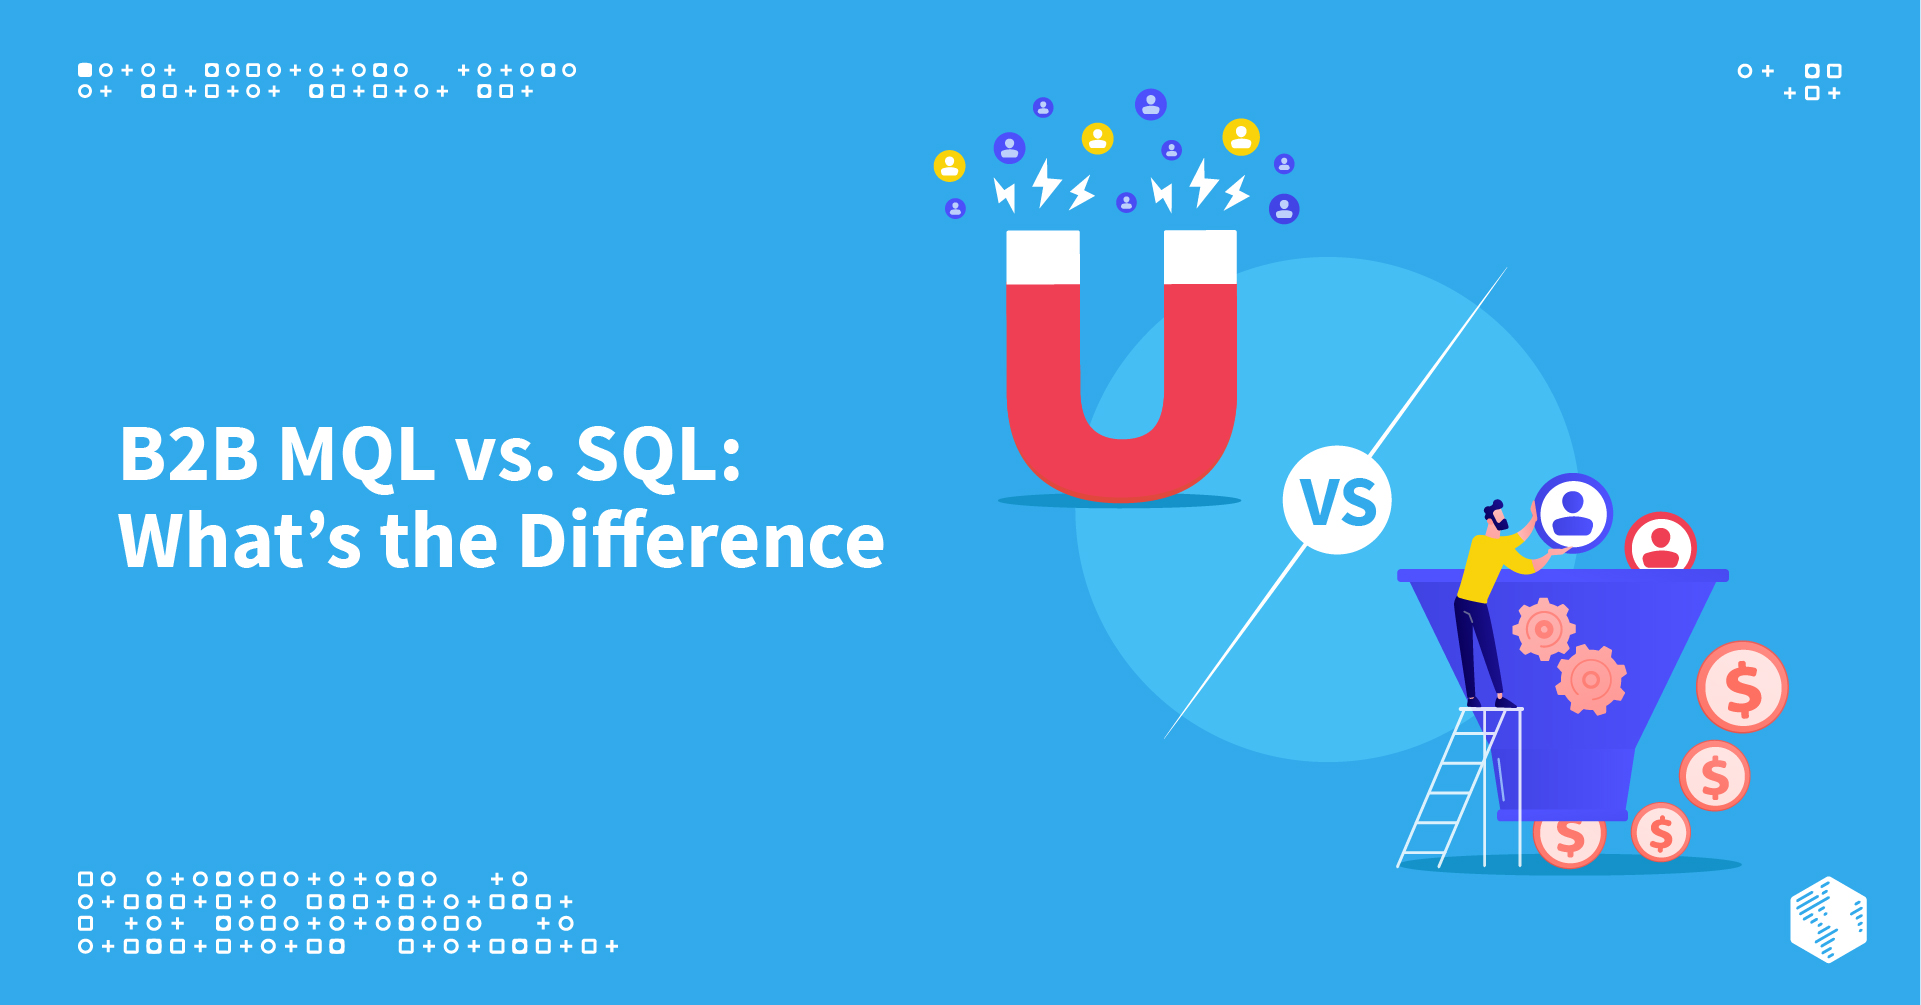 B2B MQL vs. SQL: What's the Difference?